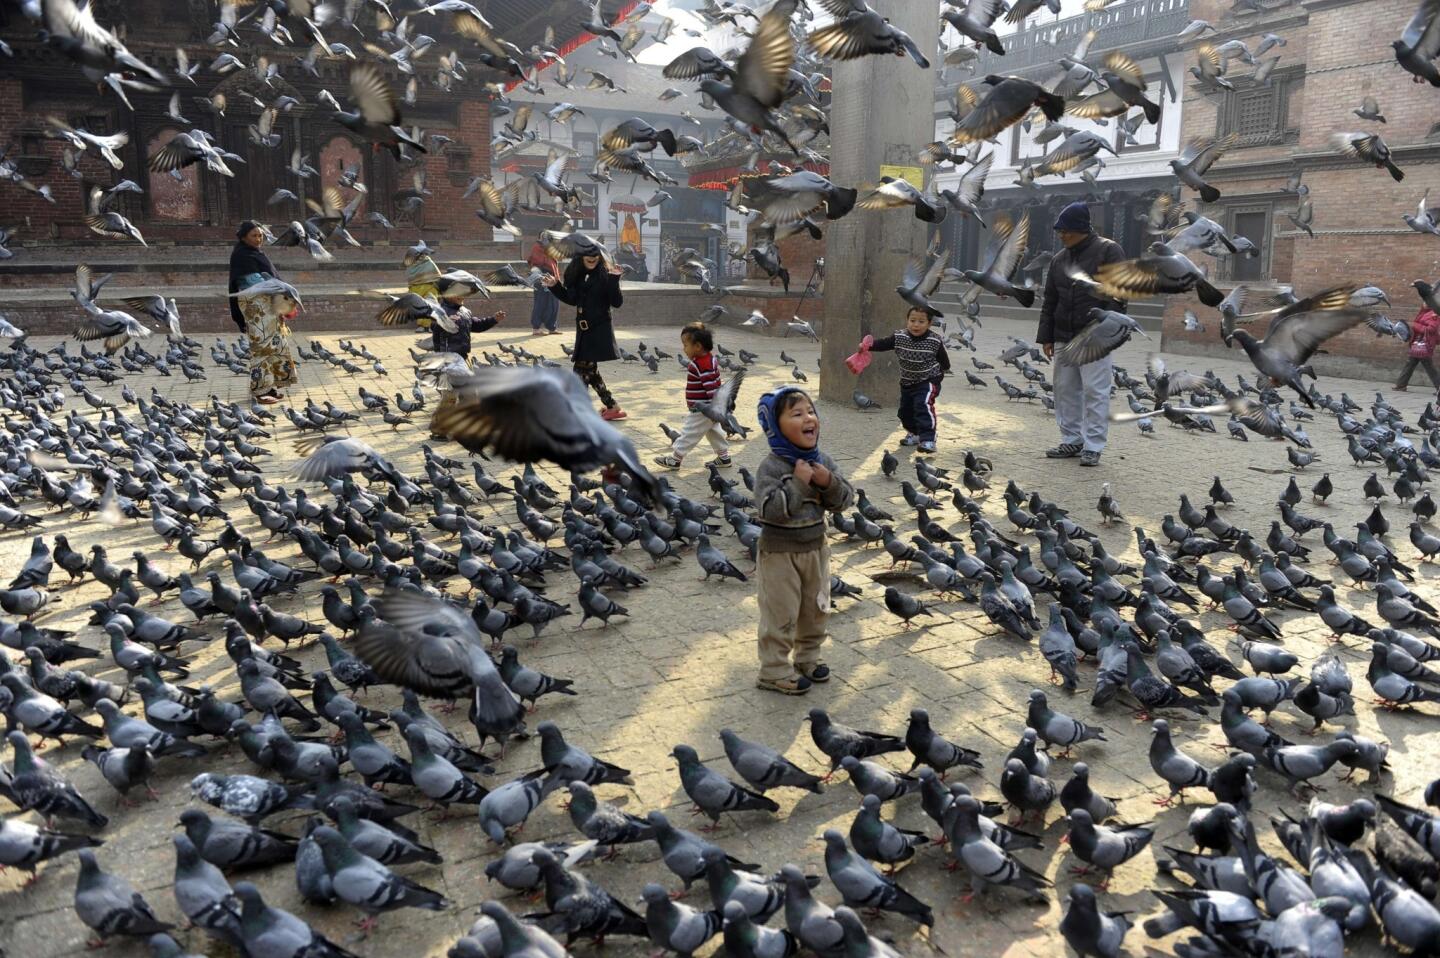 Feeding pigeons, and more pigeons